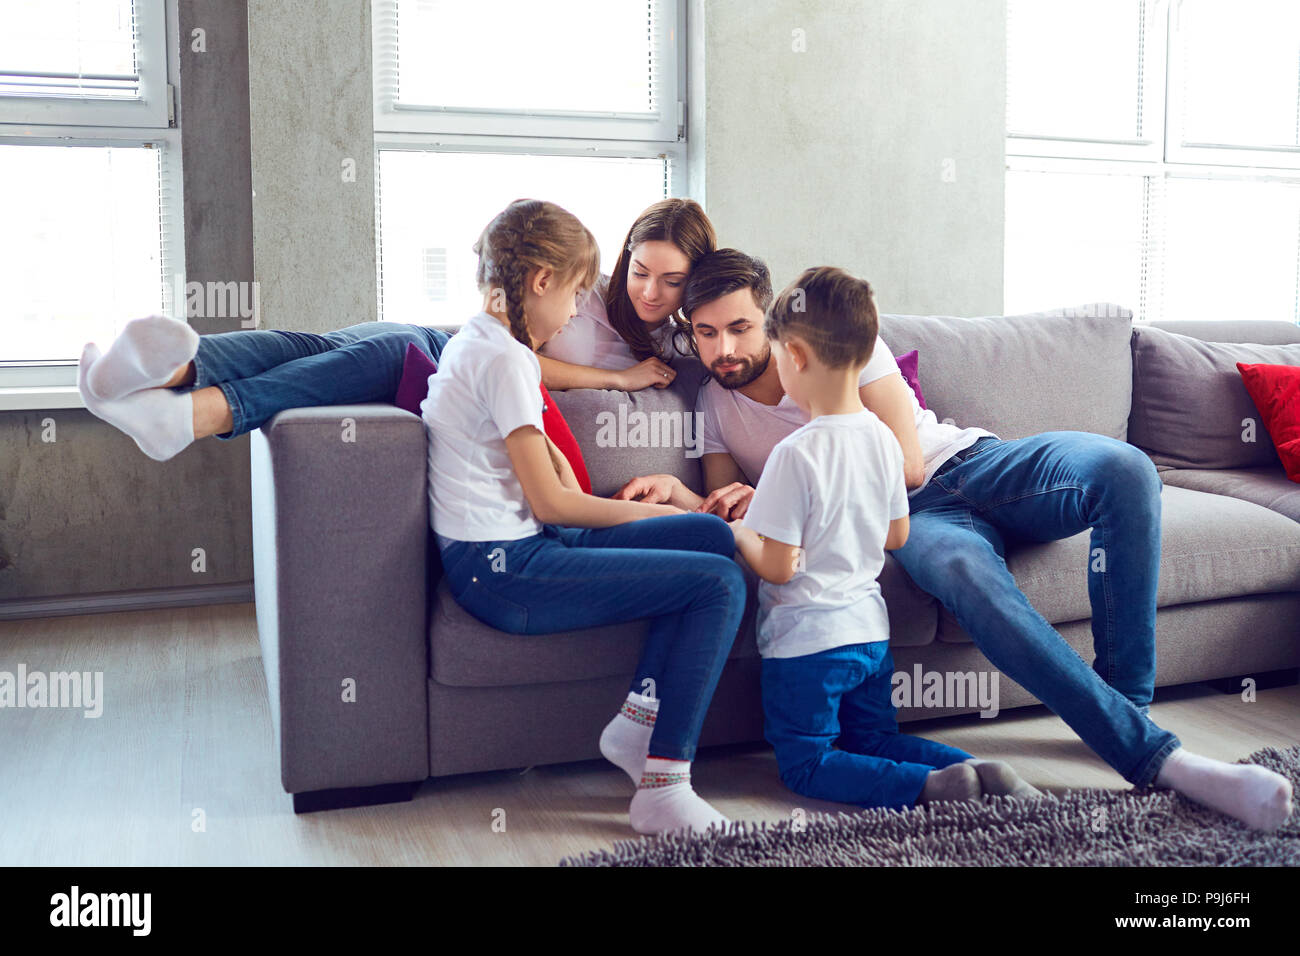 Mother, father and children play together. Stock Photo